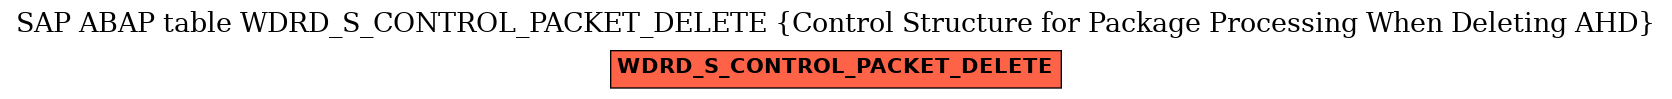 E-R Diagram for table WDRD_S_CONTROL_PACKET_DELETE (Control Structure for Package Processing When Deleting AHD)